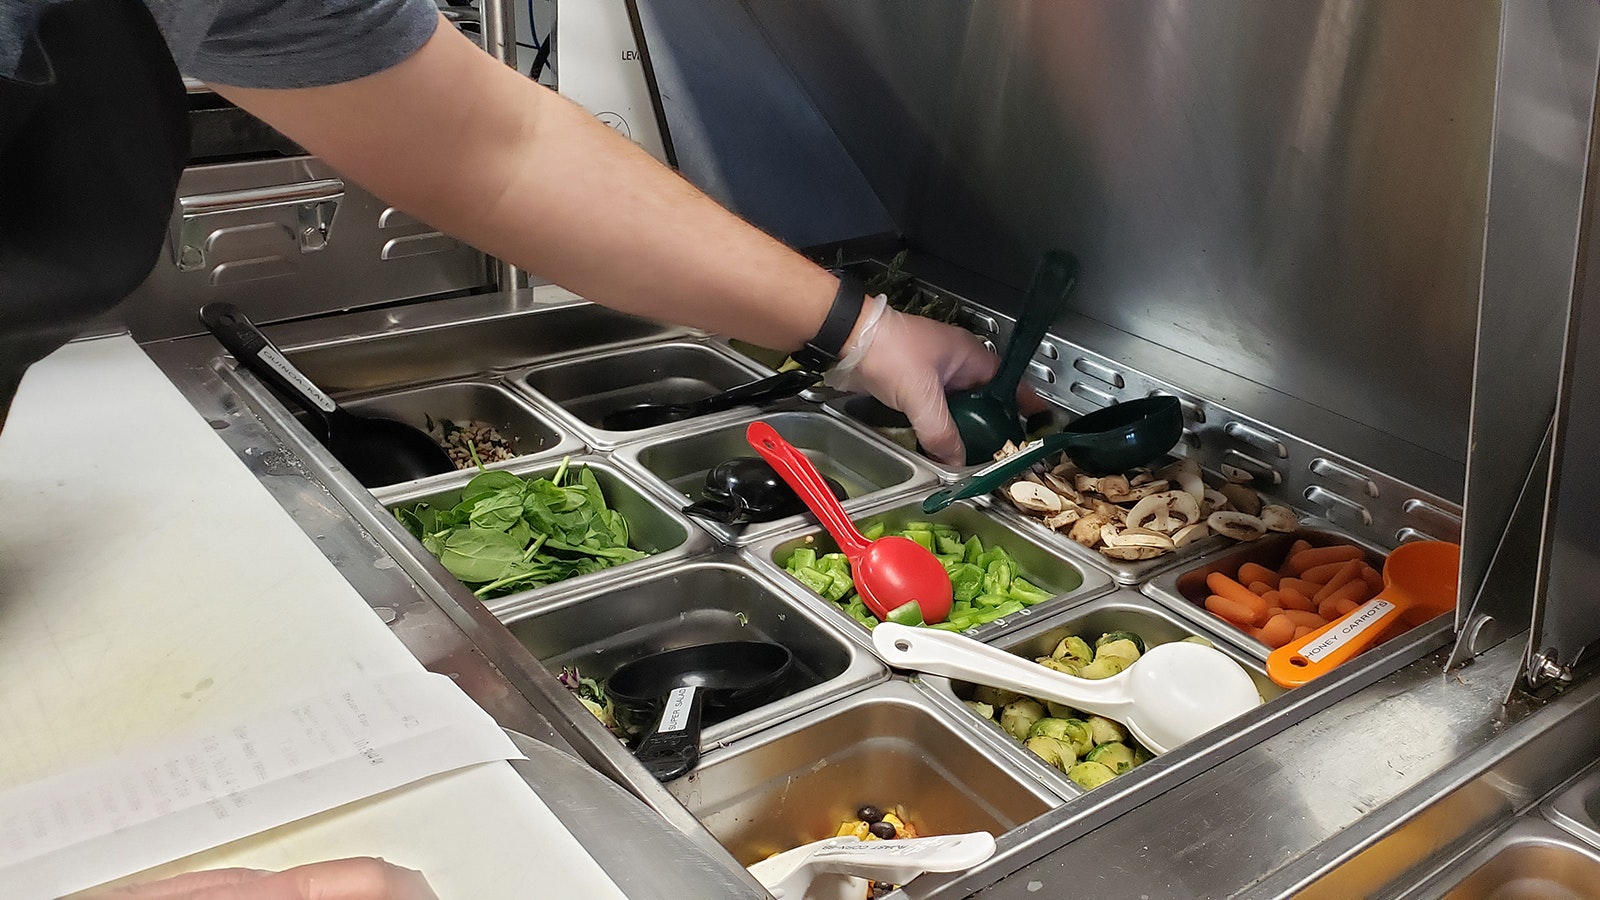 Ingredients for build-a-bowls and wraps are arranged sandwich artist style for quick service prep.